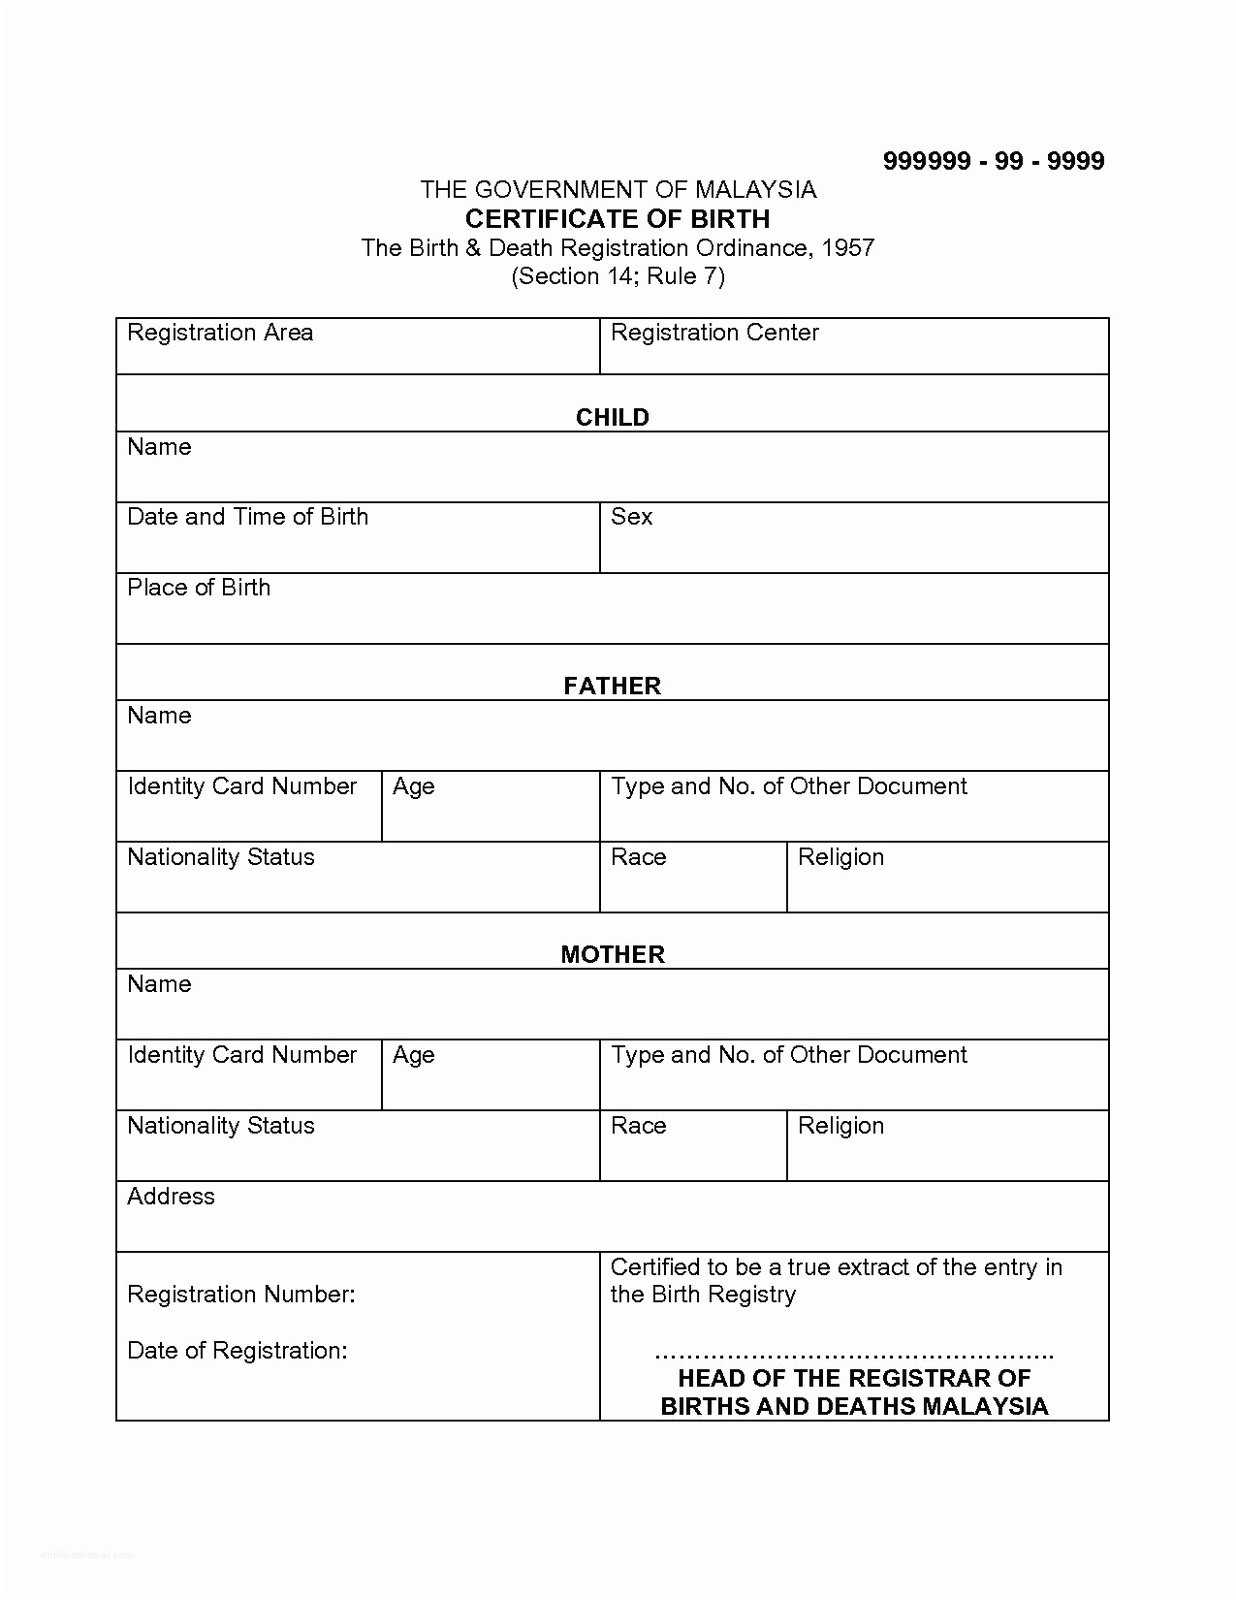 Death Certificate Sample Pakistan Archives Best Marriage Throughout Birth Certificate Translation Template Uscis